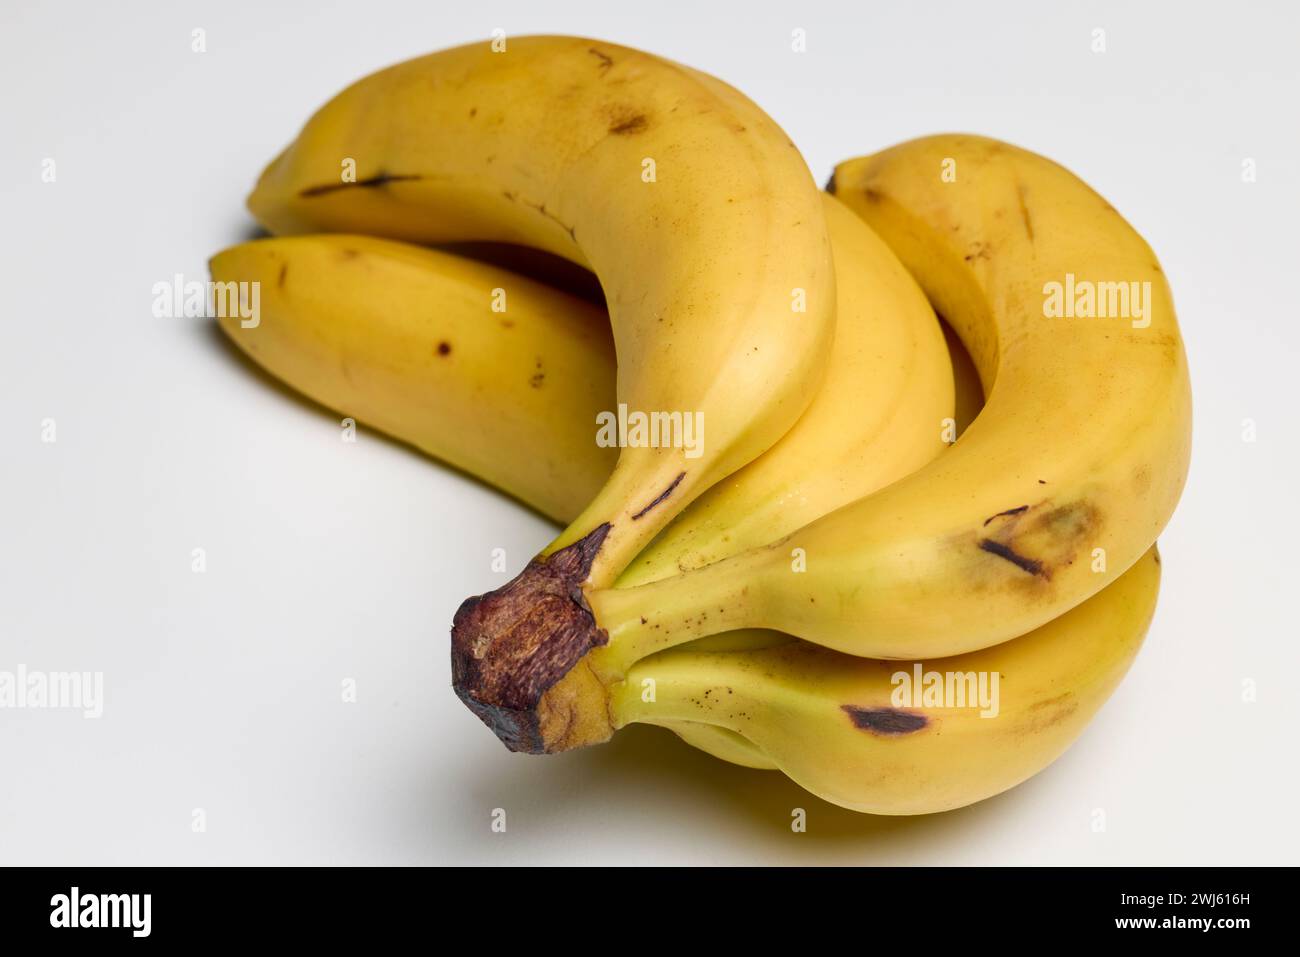 Well-ripened organic bananas on a counter. Stock Photo